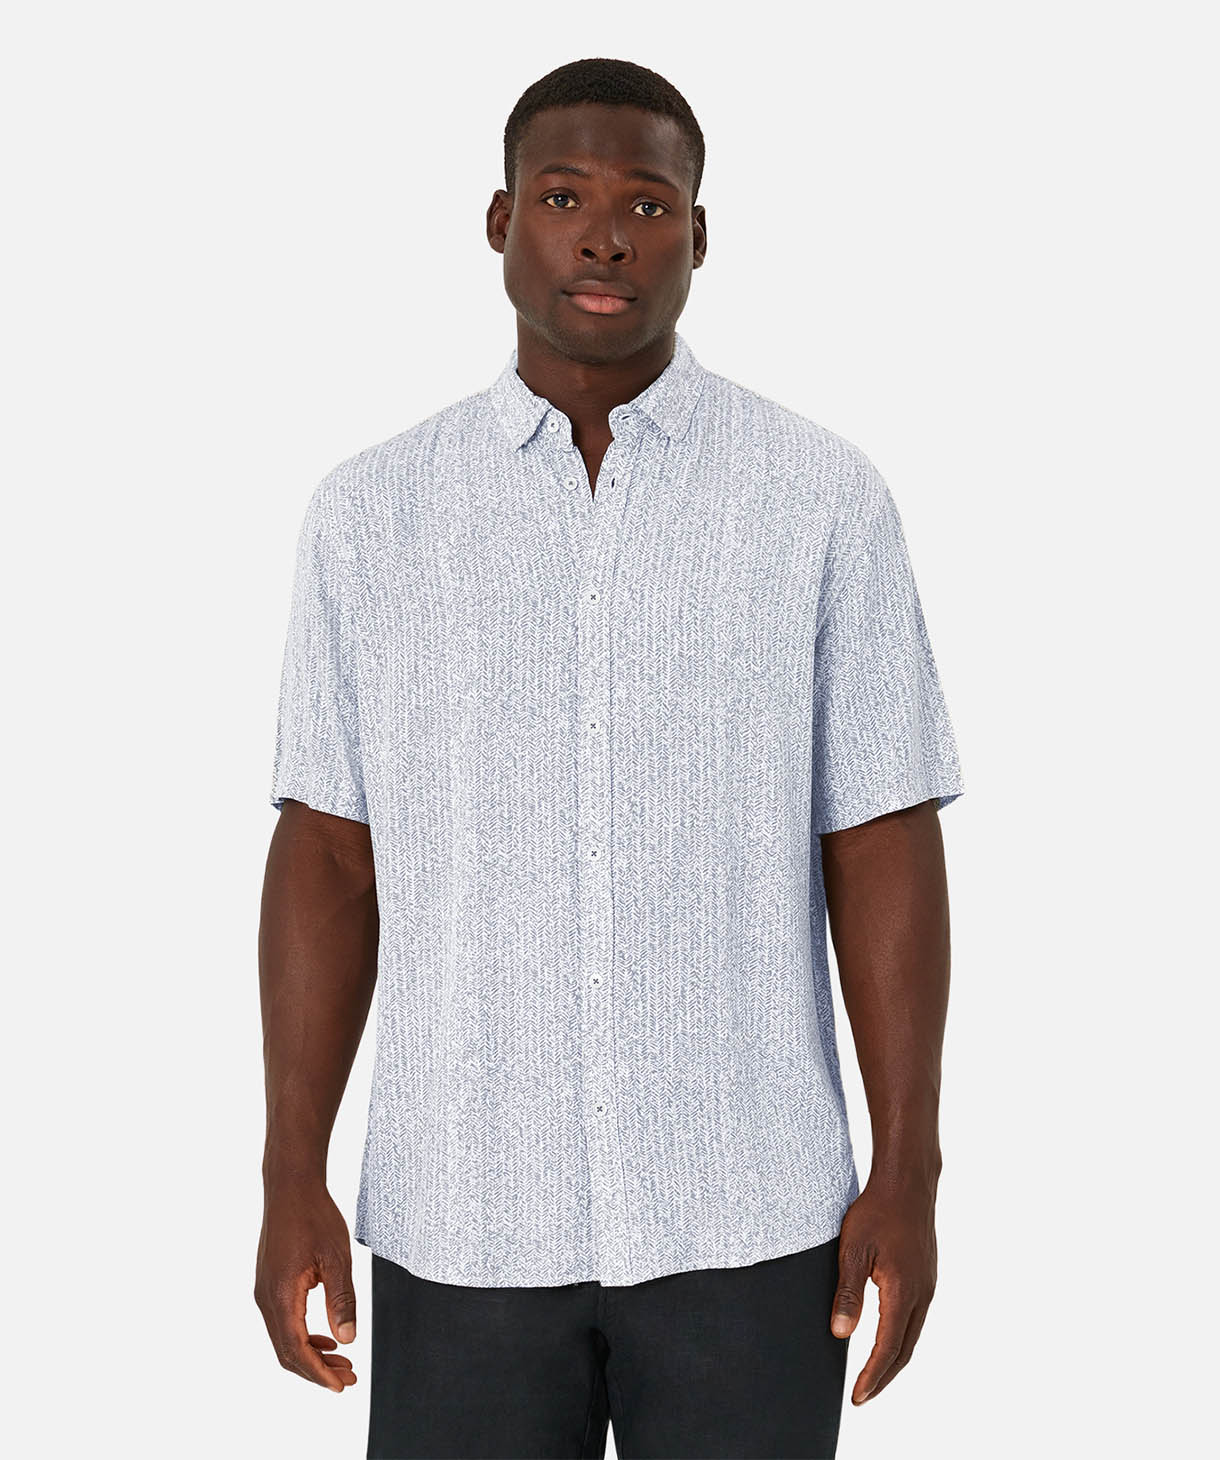 Shop The Moncada S/s Shirt in Light Blue/White – Industrie Clothing Pty Ltd